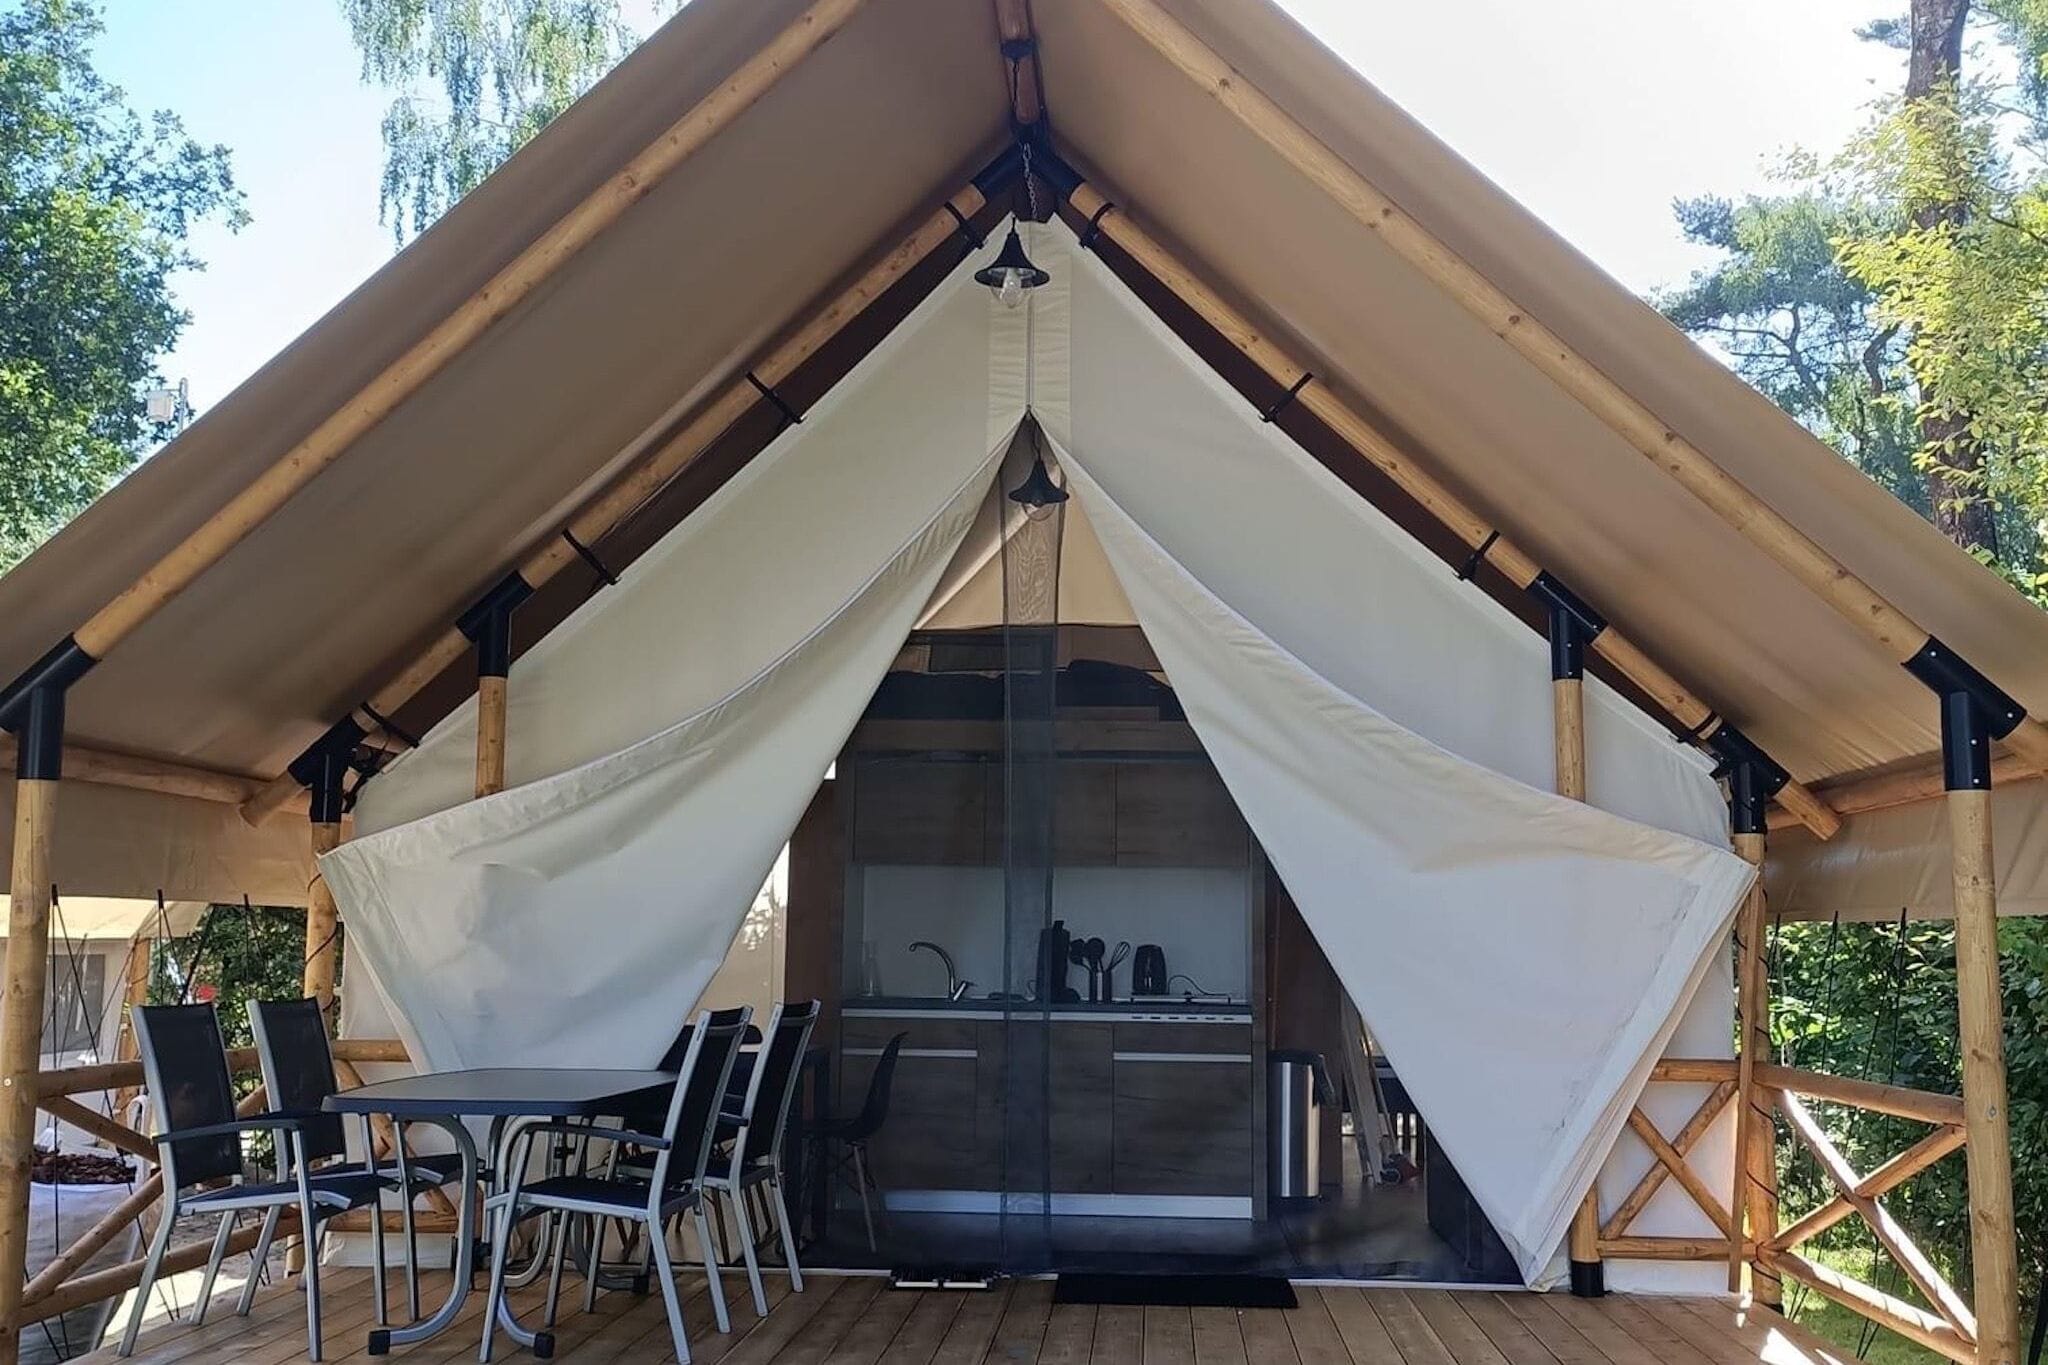 Nice tentlodge with veranda, 2km from the Efteling